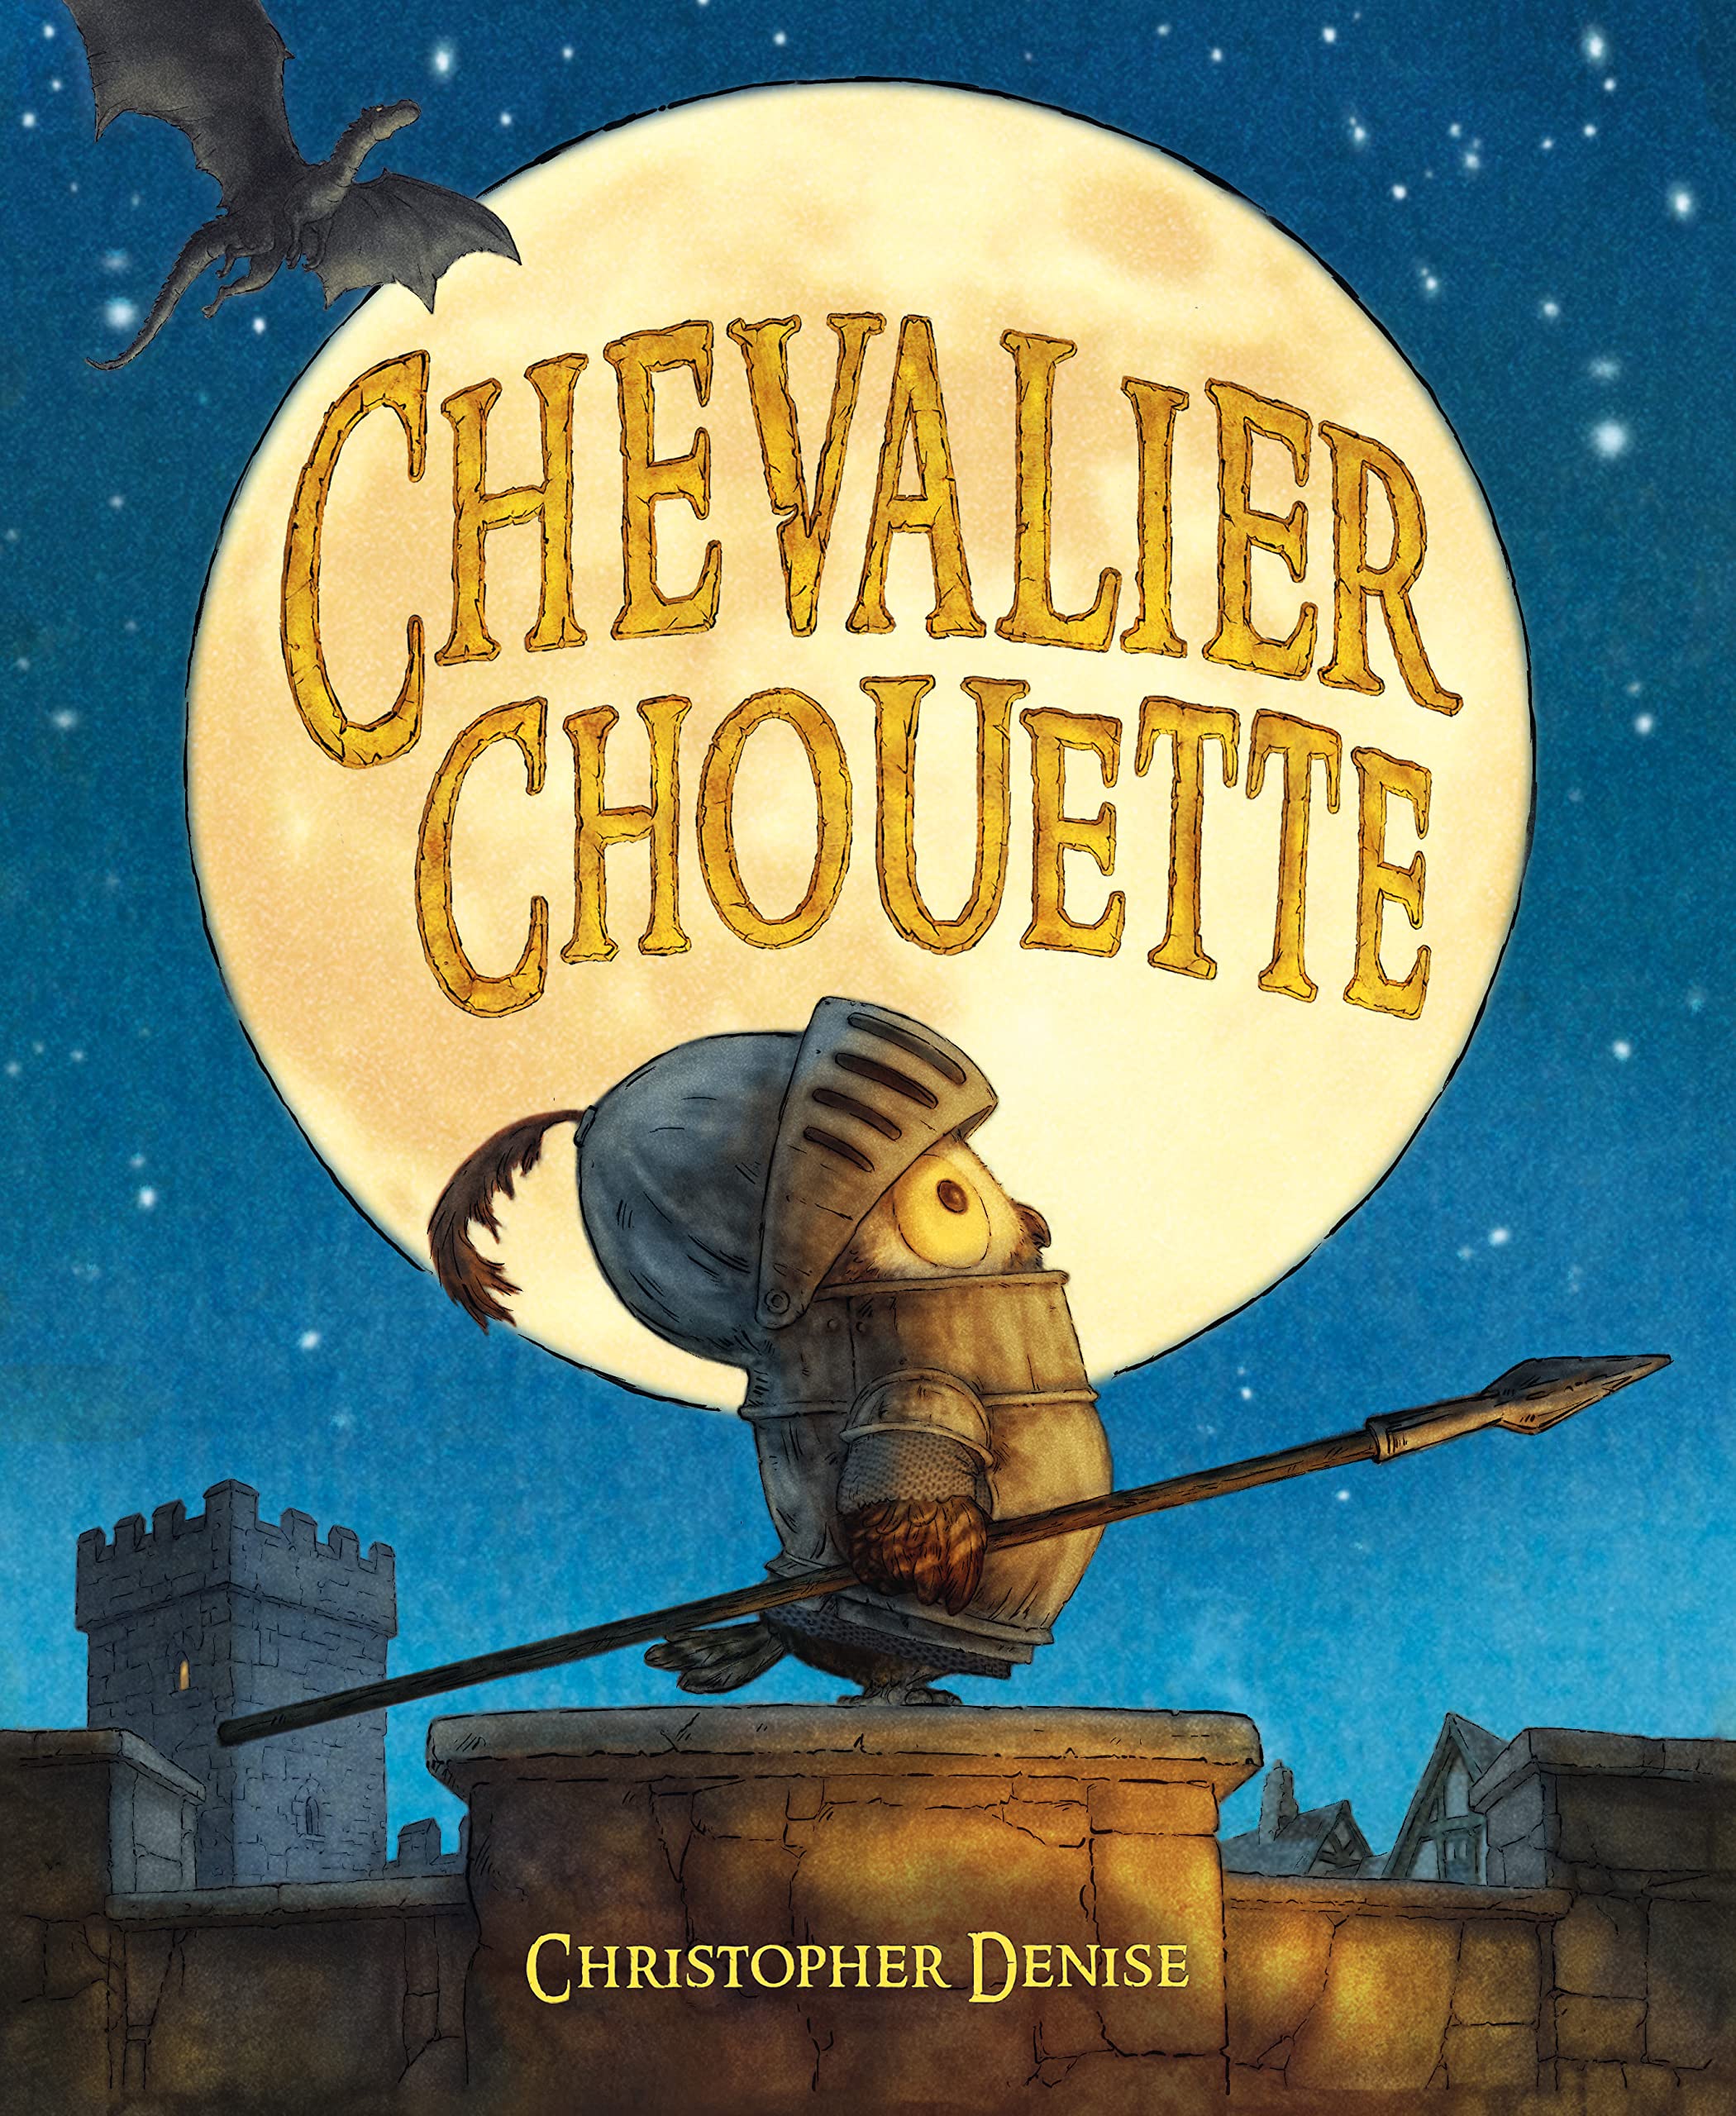 Chevalier Chouette – Christopher Denise – Mon coin lecture